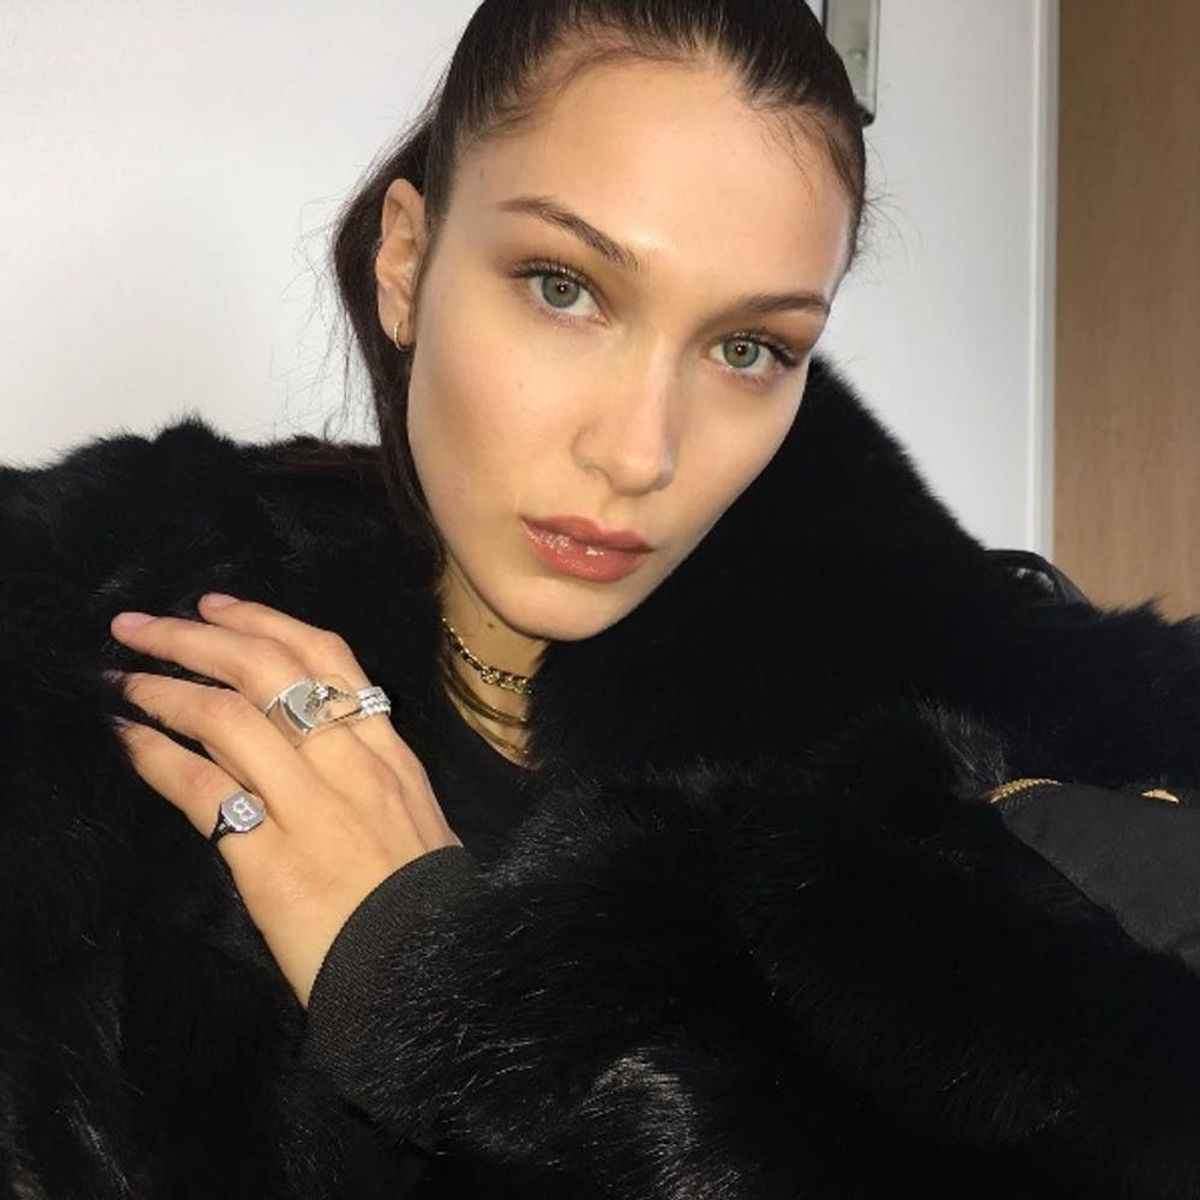 Bella Hadid’s Everyday Meal Is NOT AT ALL What You’d Expect